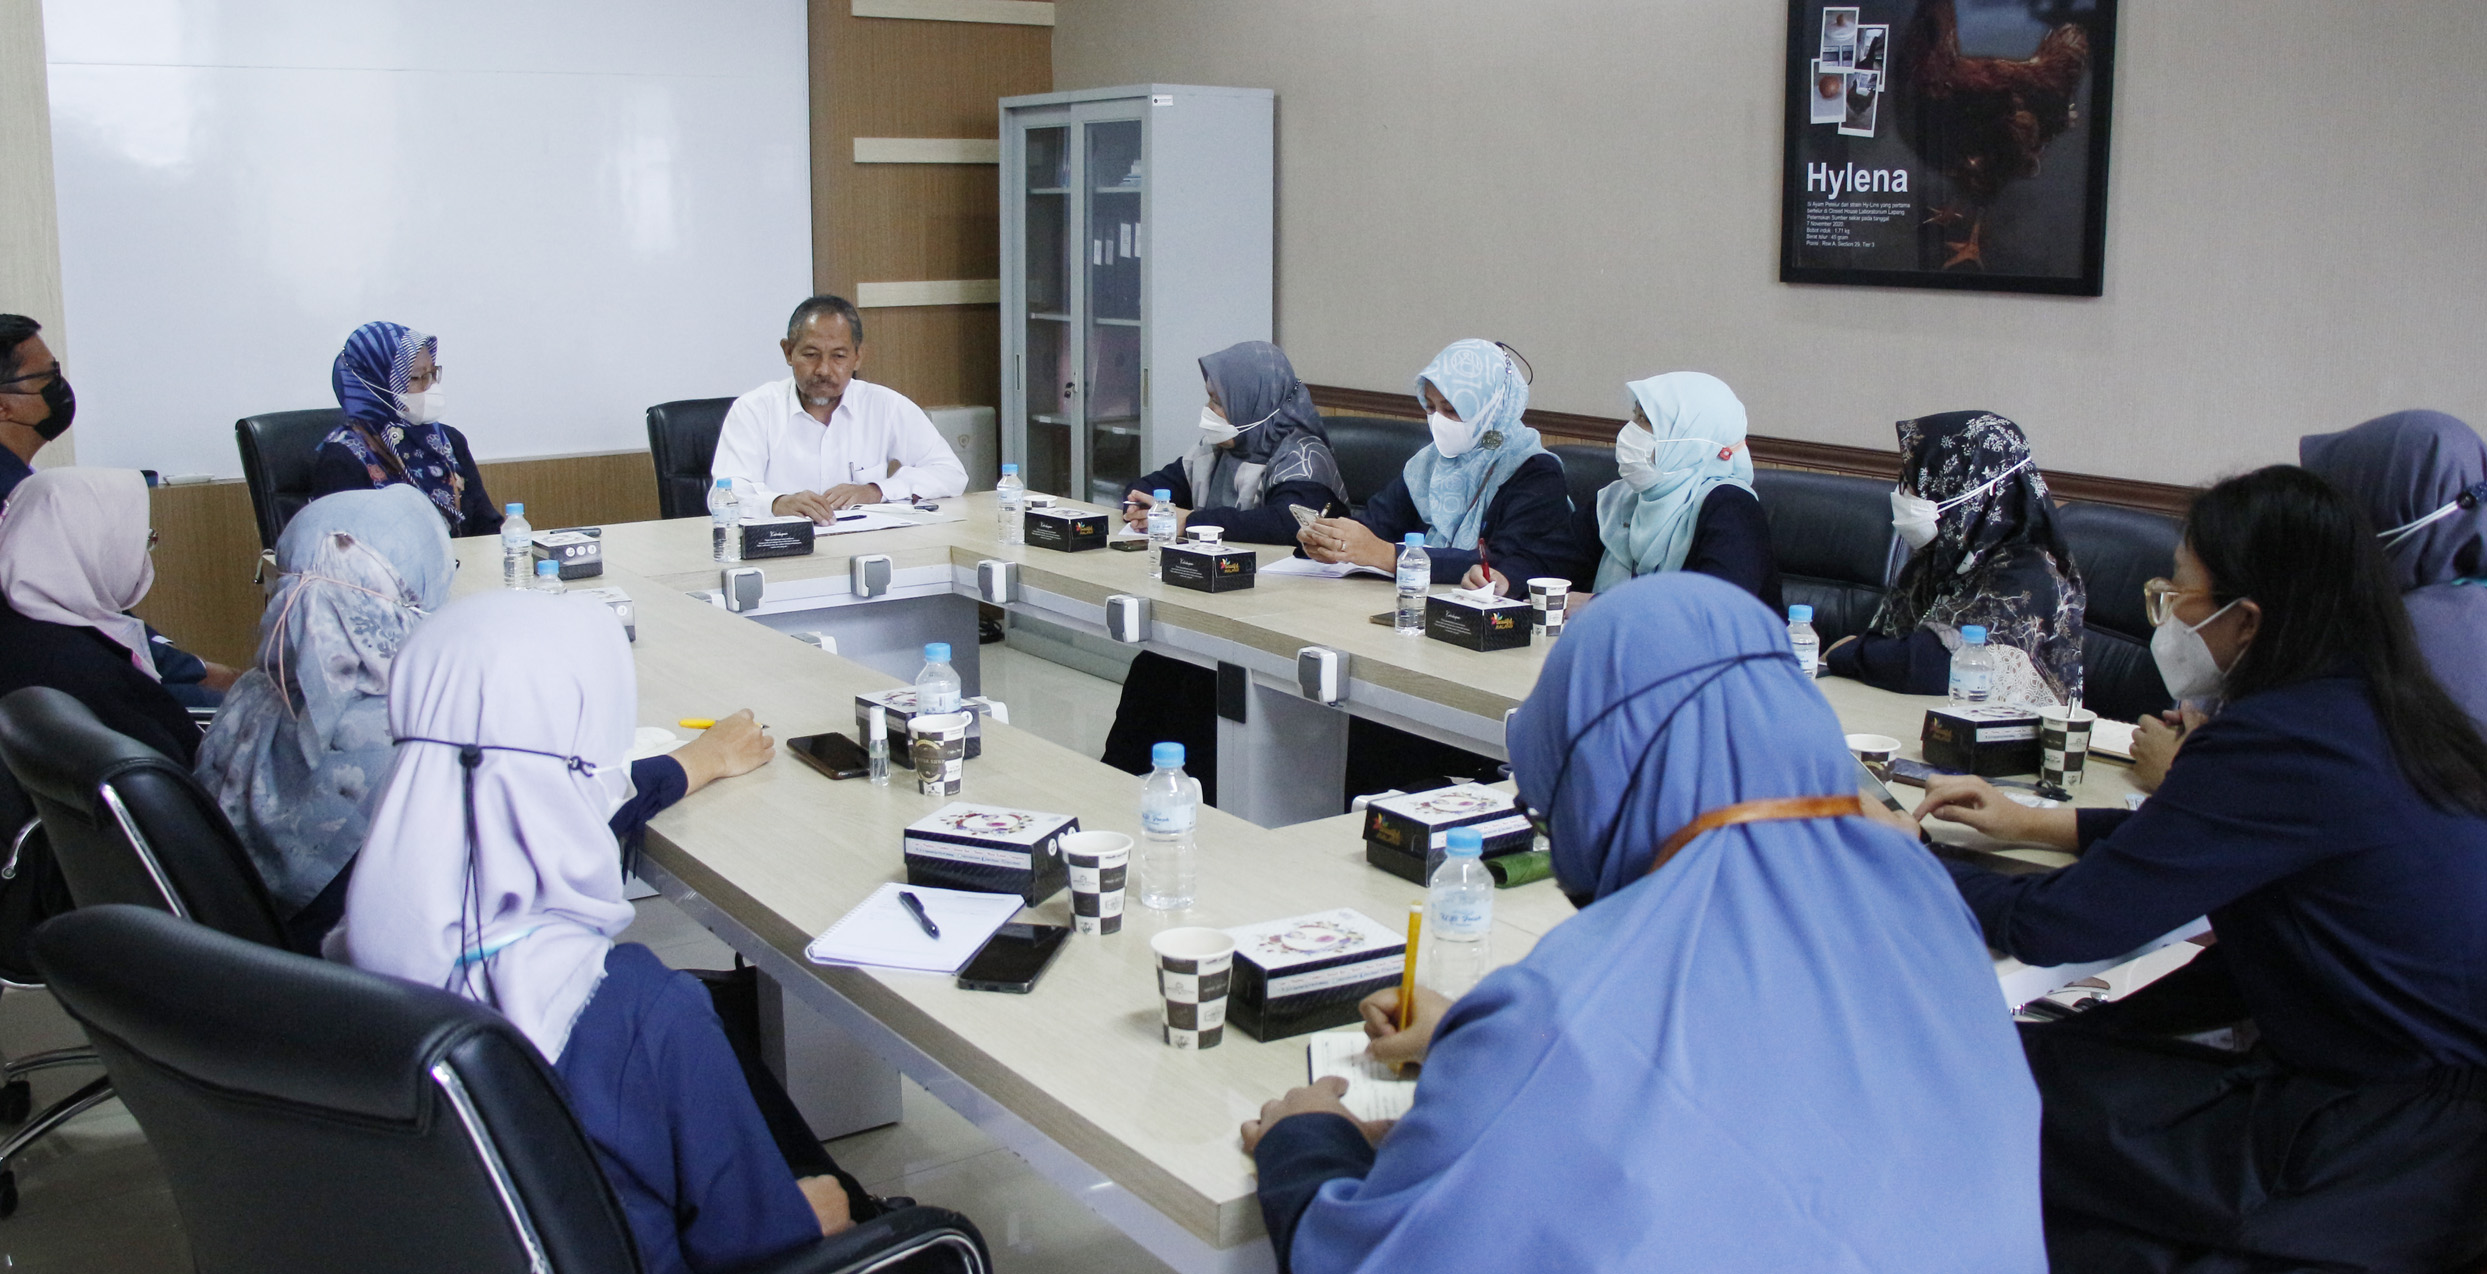  The Biotechnology Laboratory of Fapet UB is visited by BPOM to Review Facilities and Research